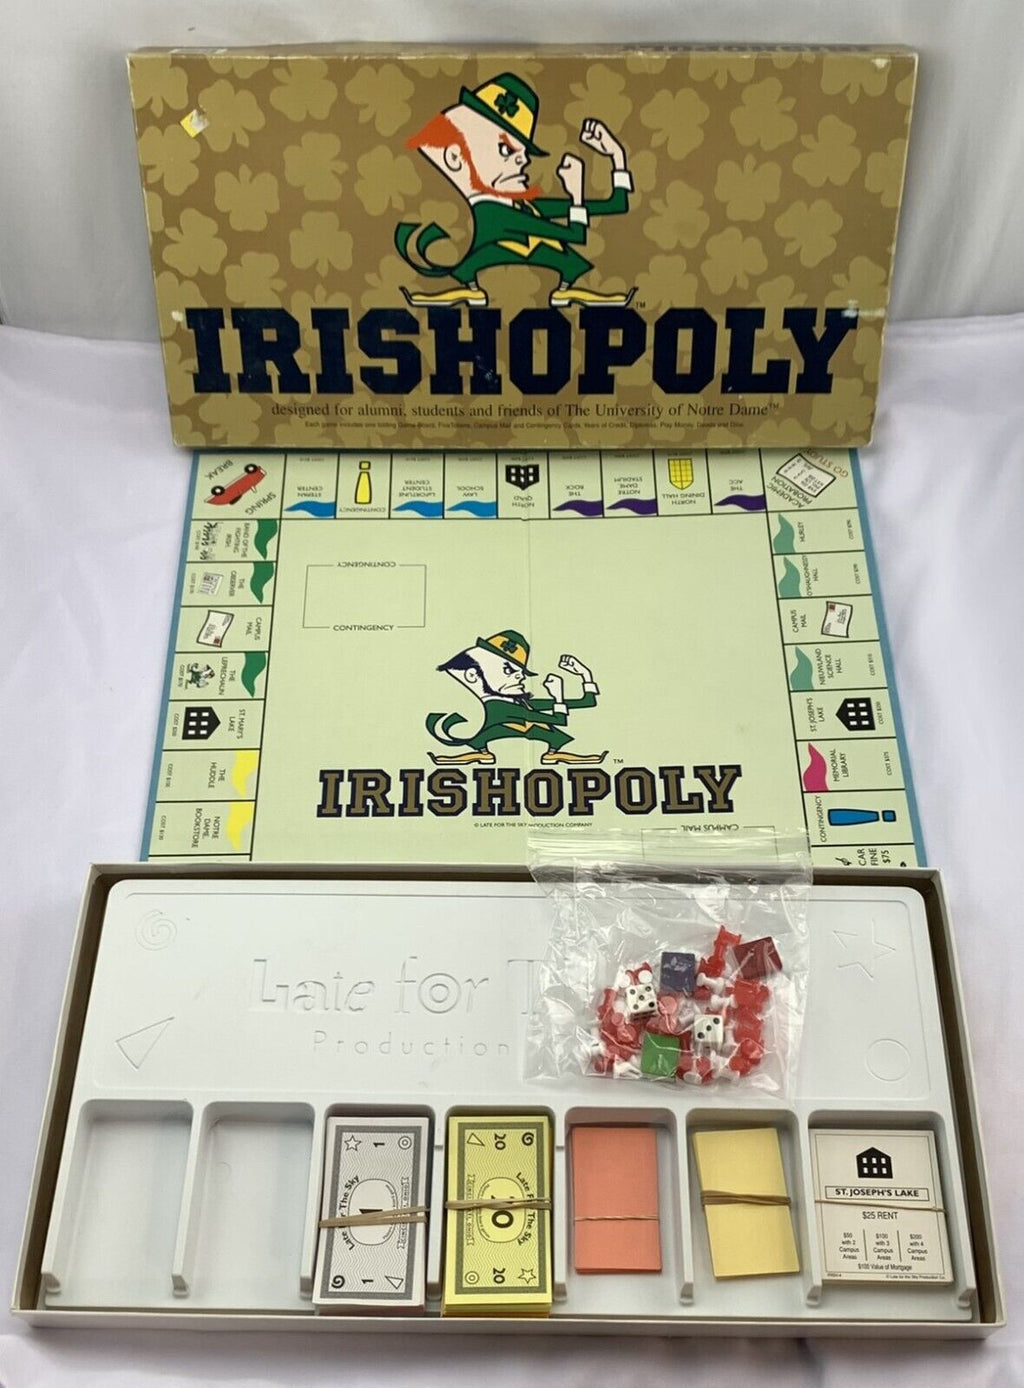 Irishopoly Monopoly Game University of Notre Dame - 1990 - Late for the Sky - Great Condition